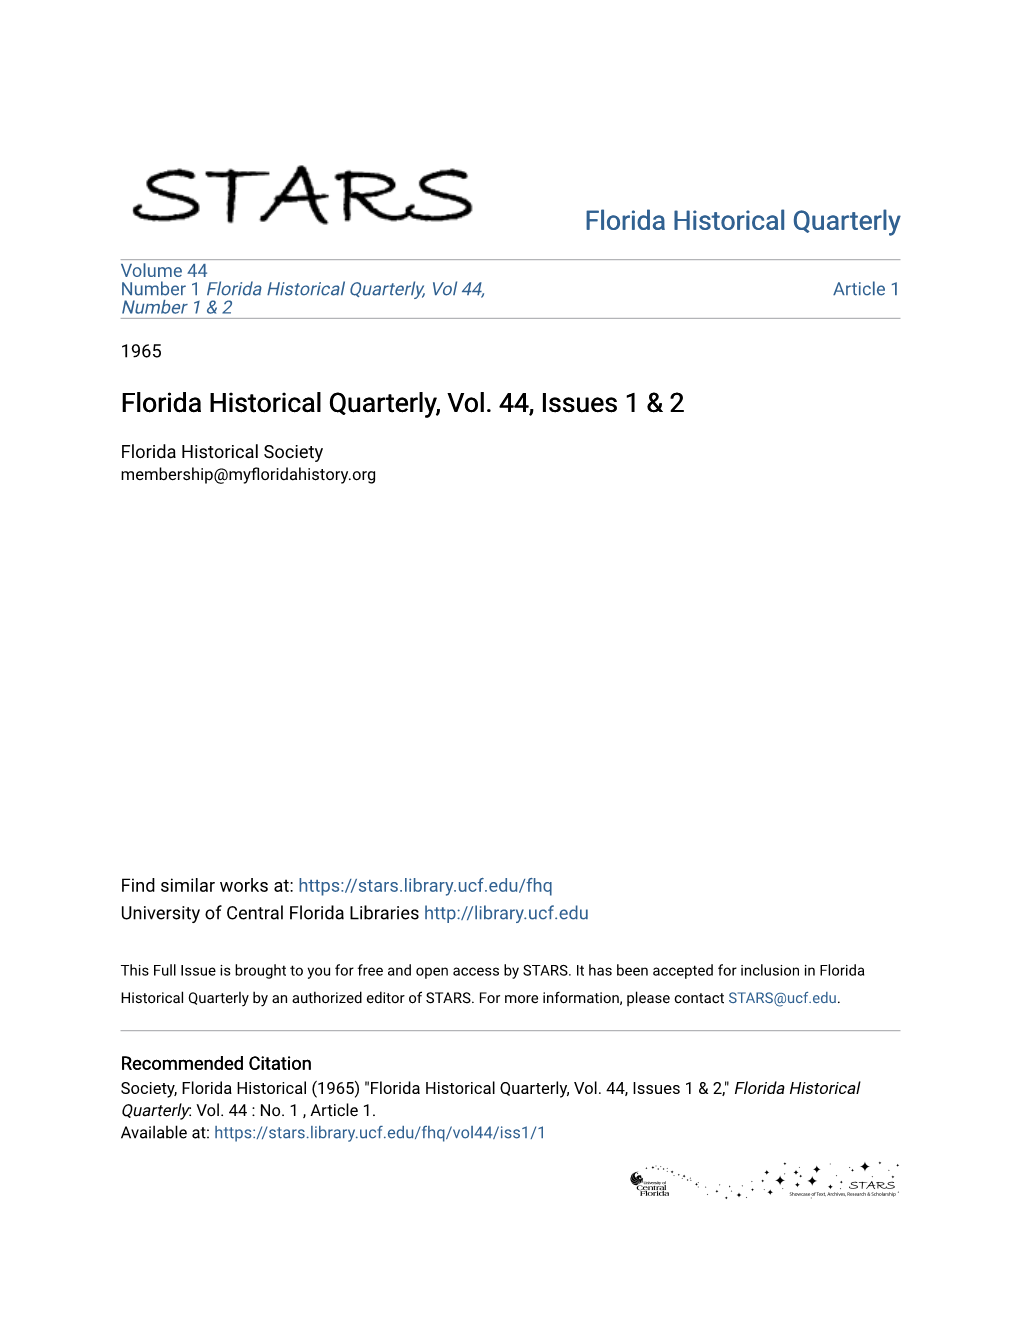 Florida Historical Quarterly, Vol. 44, Issues 1 & 2